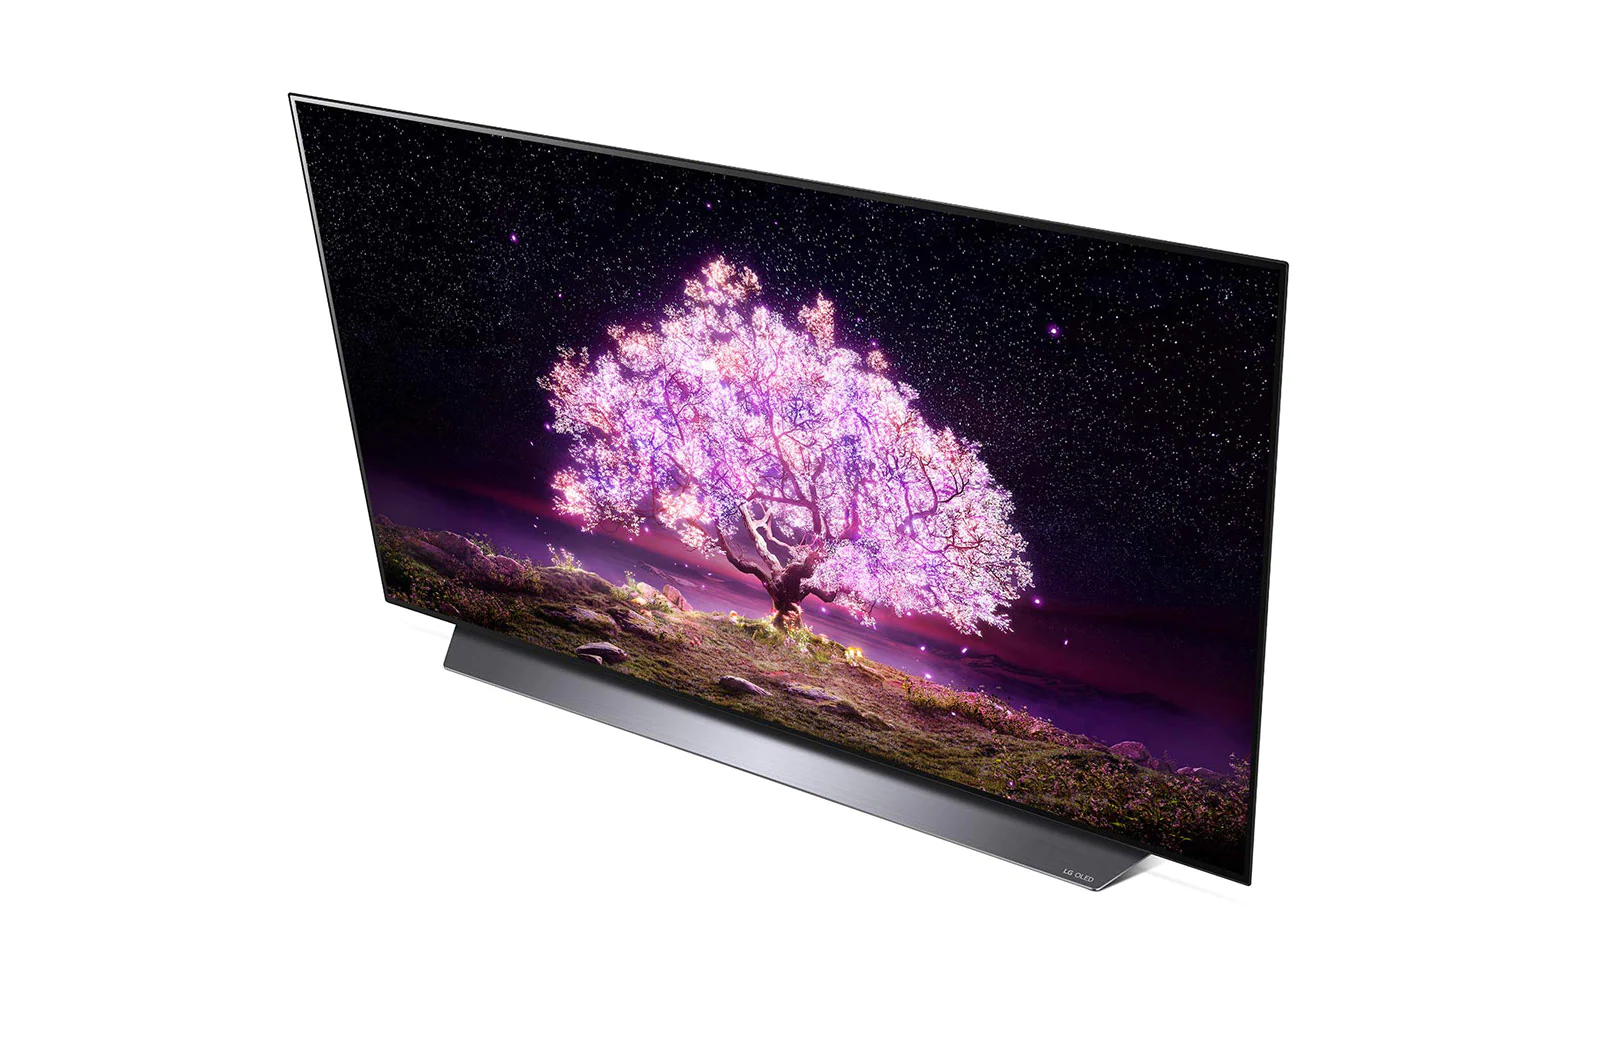 Our favourite 4K TV for gaming, the LG C1 OLED, is £759 for a 55